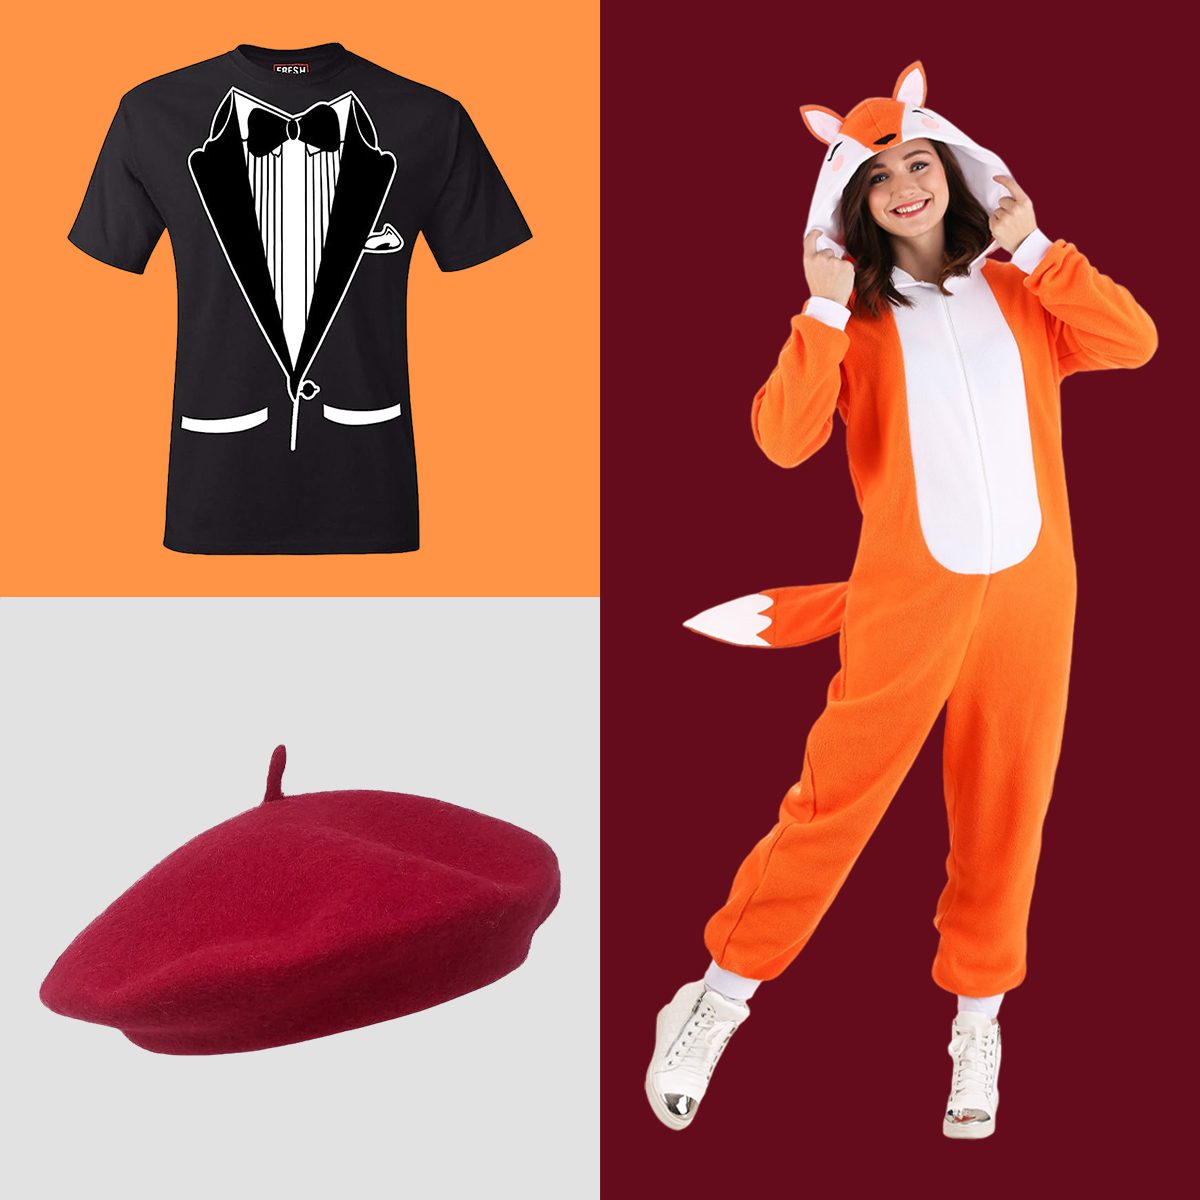 Word Play Costumes